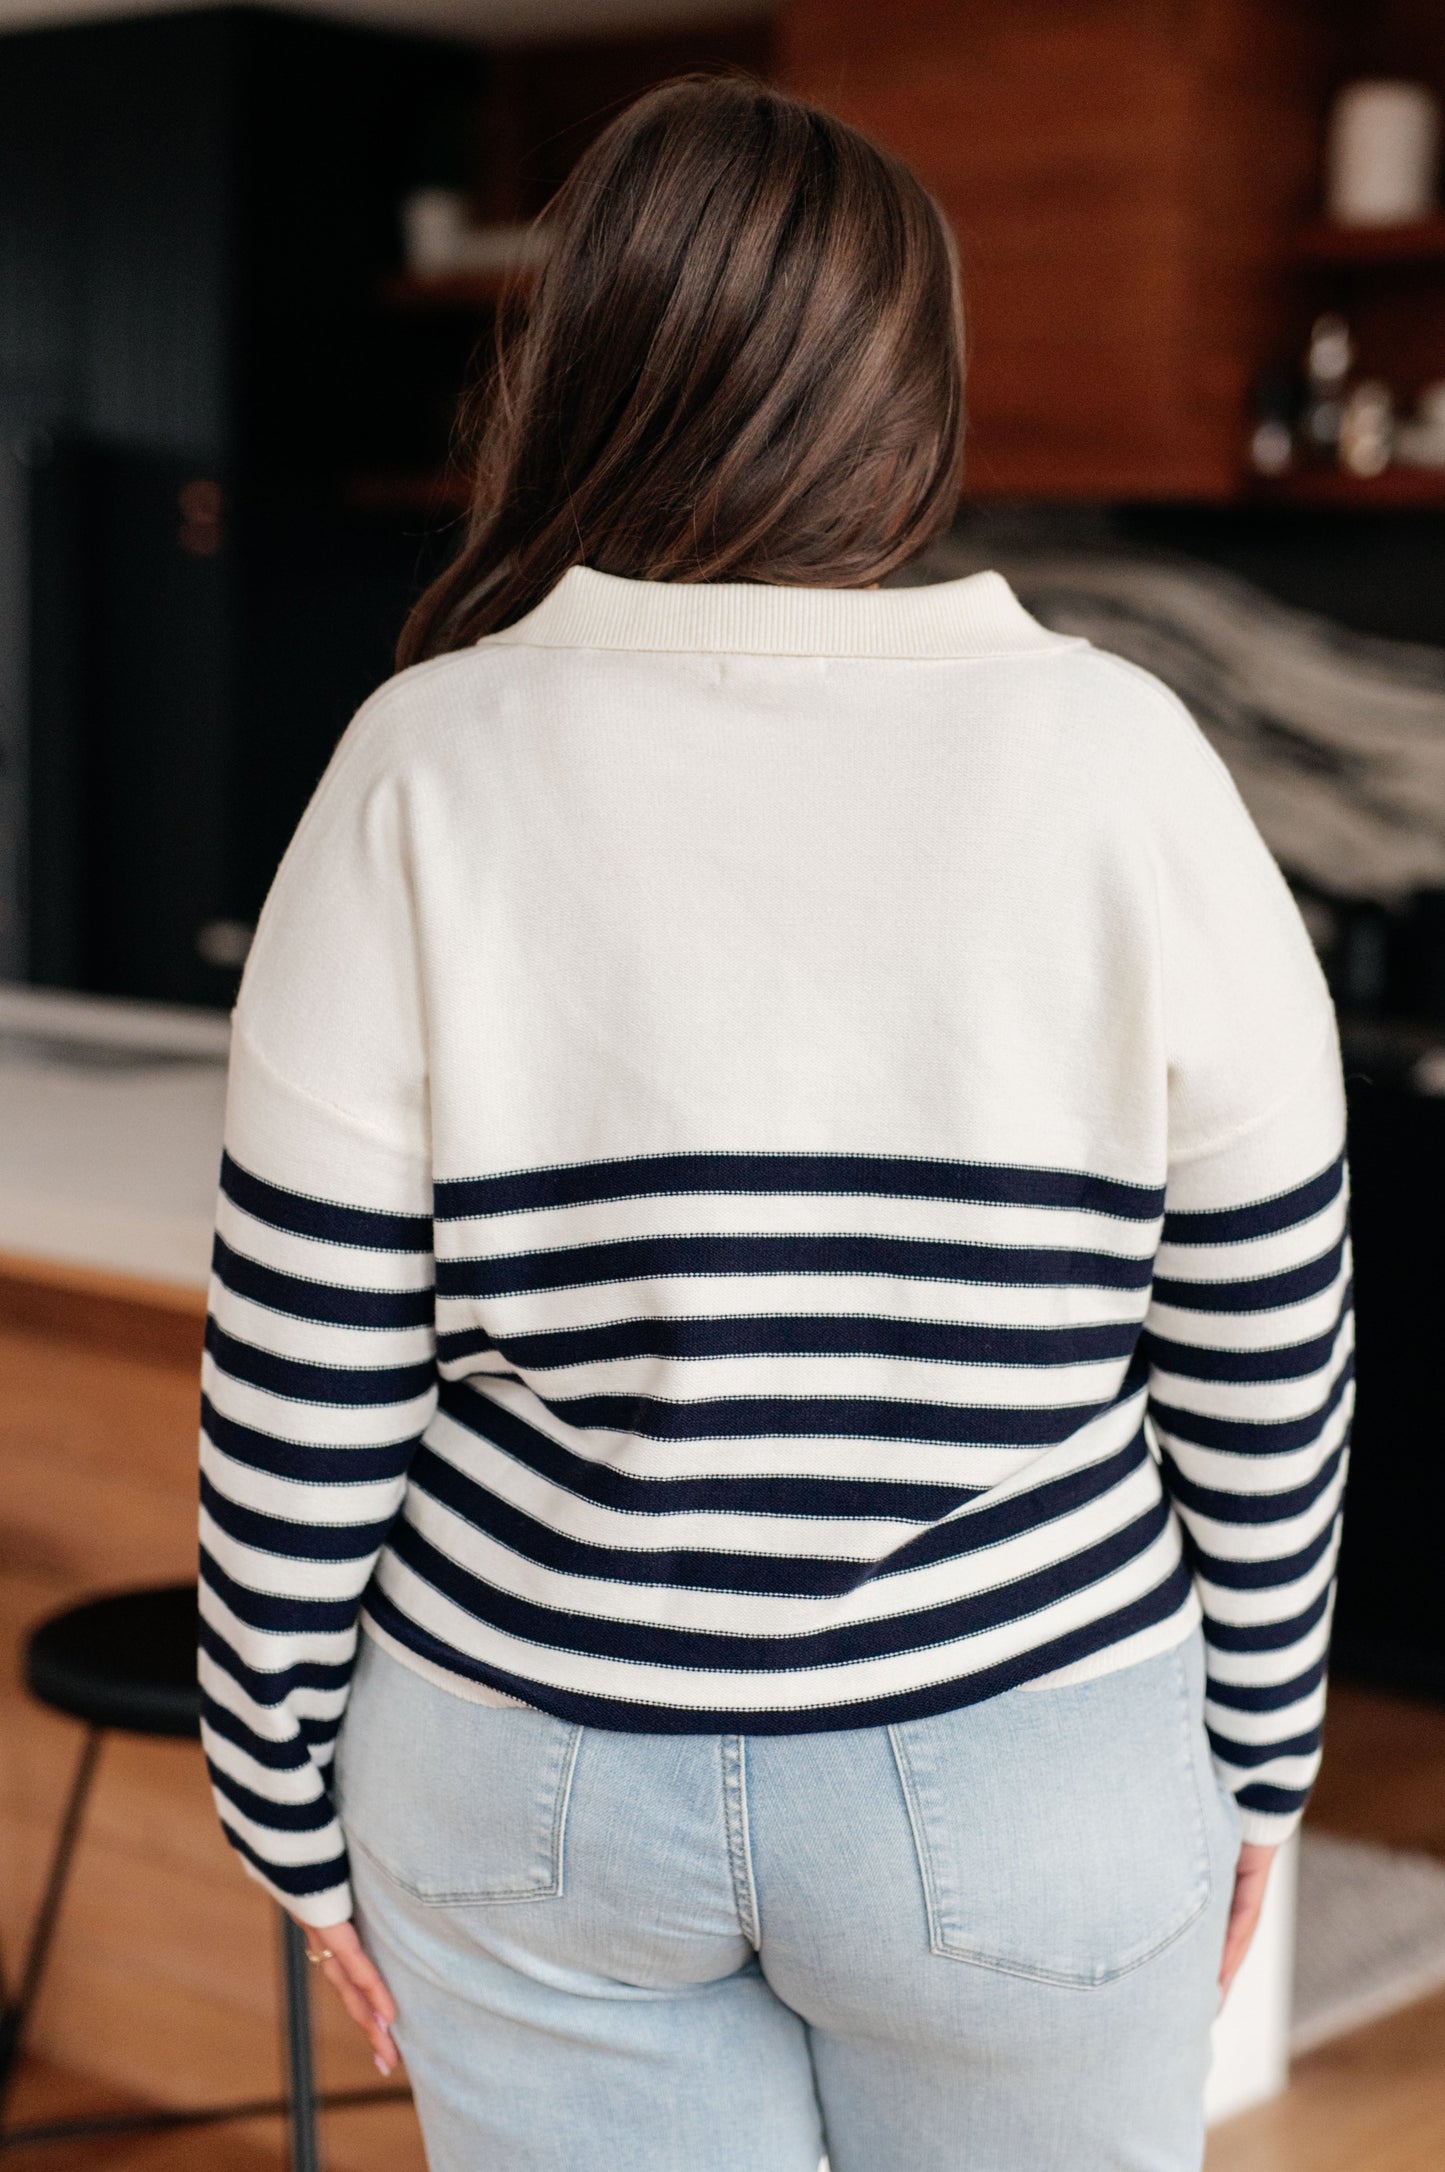 Memorable Moments Striped Sweater in White*